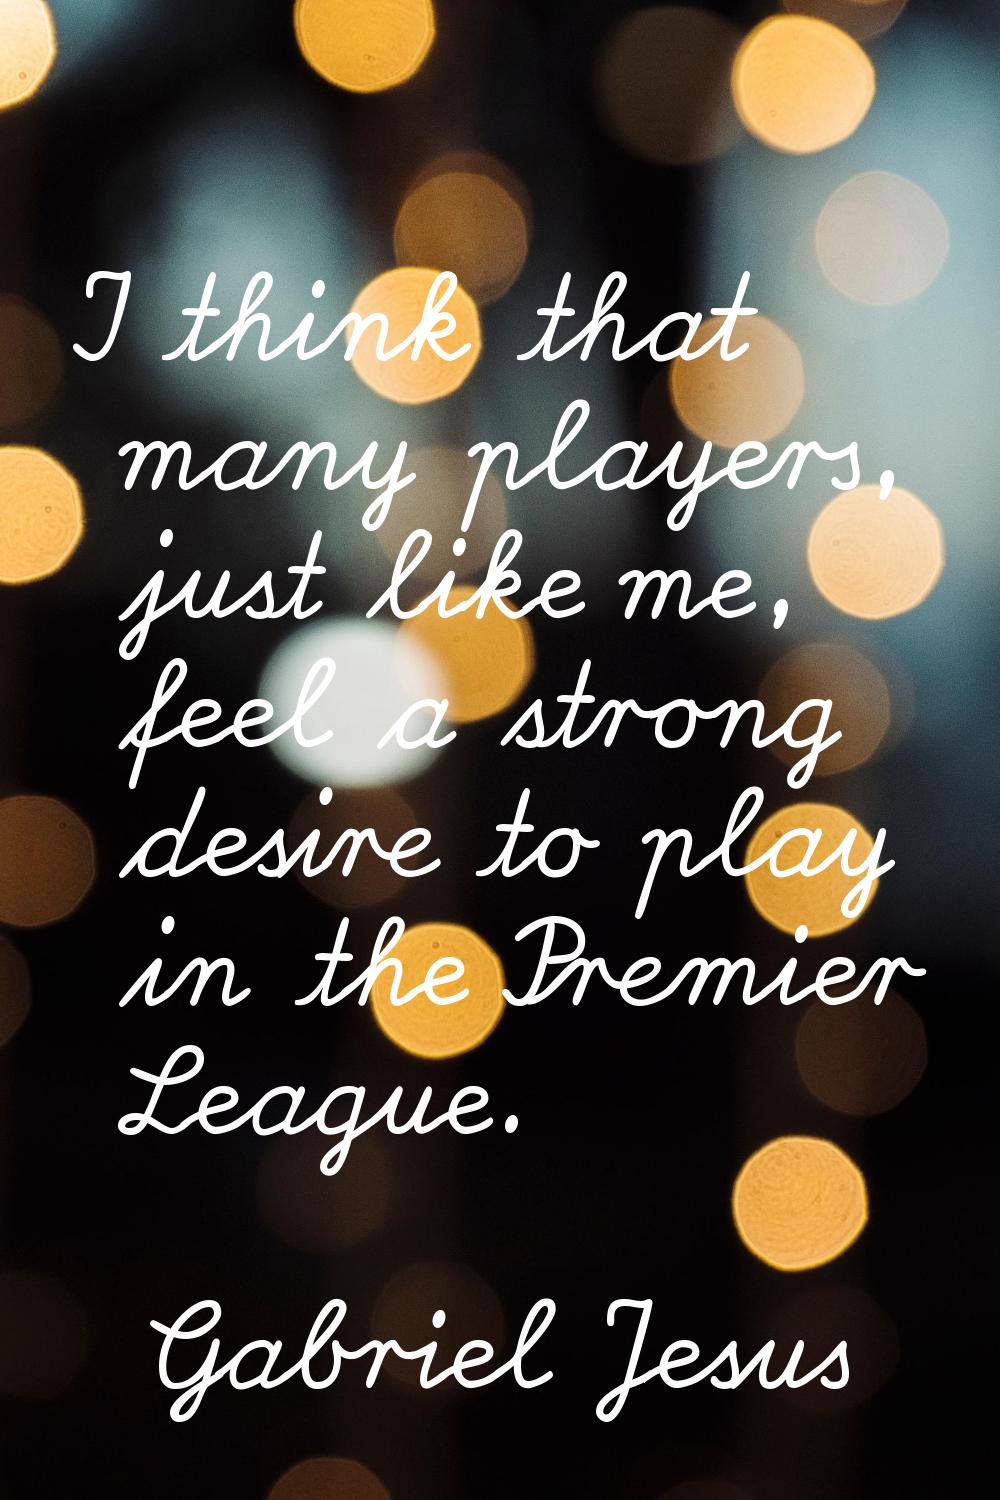 I think that many players, just like me, feel a strong desire to play in the Premier League.